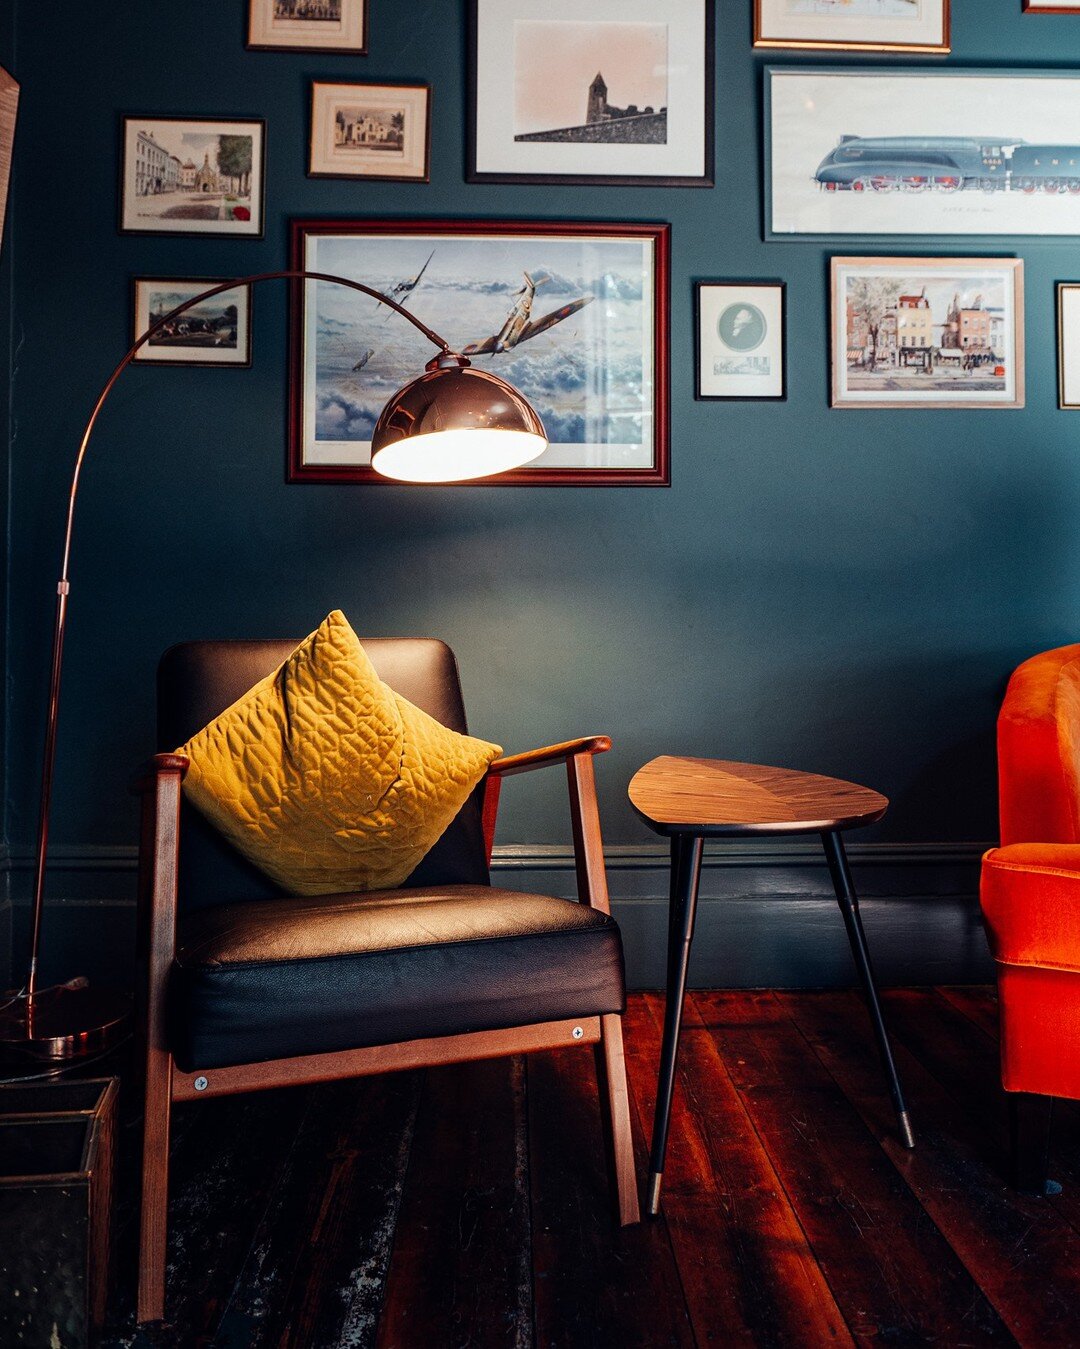 🦌 Friday, time to pull up a seat at the Abbot's Bar.

That's right, Abbots is home to its very own bar, complete with all the glass wear, lounge chairs and board games you need to keep the good times rolling.

We've even got an original vinyl record